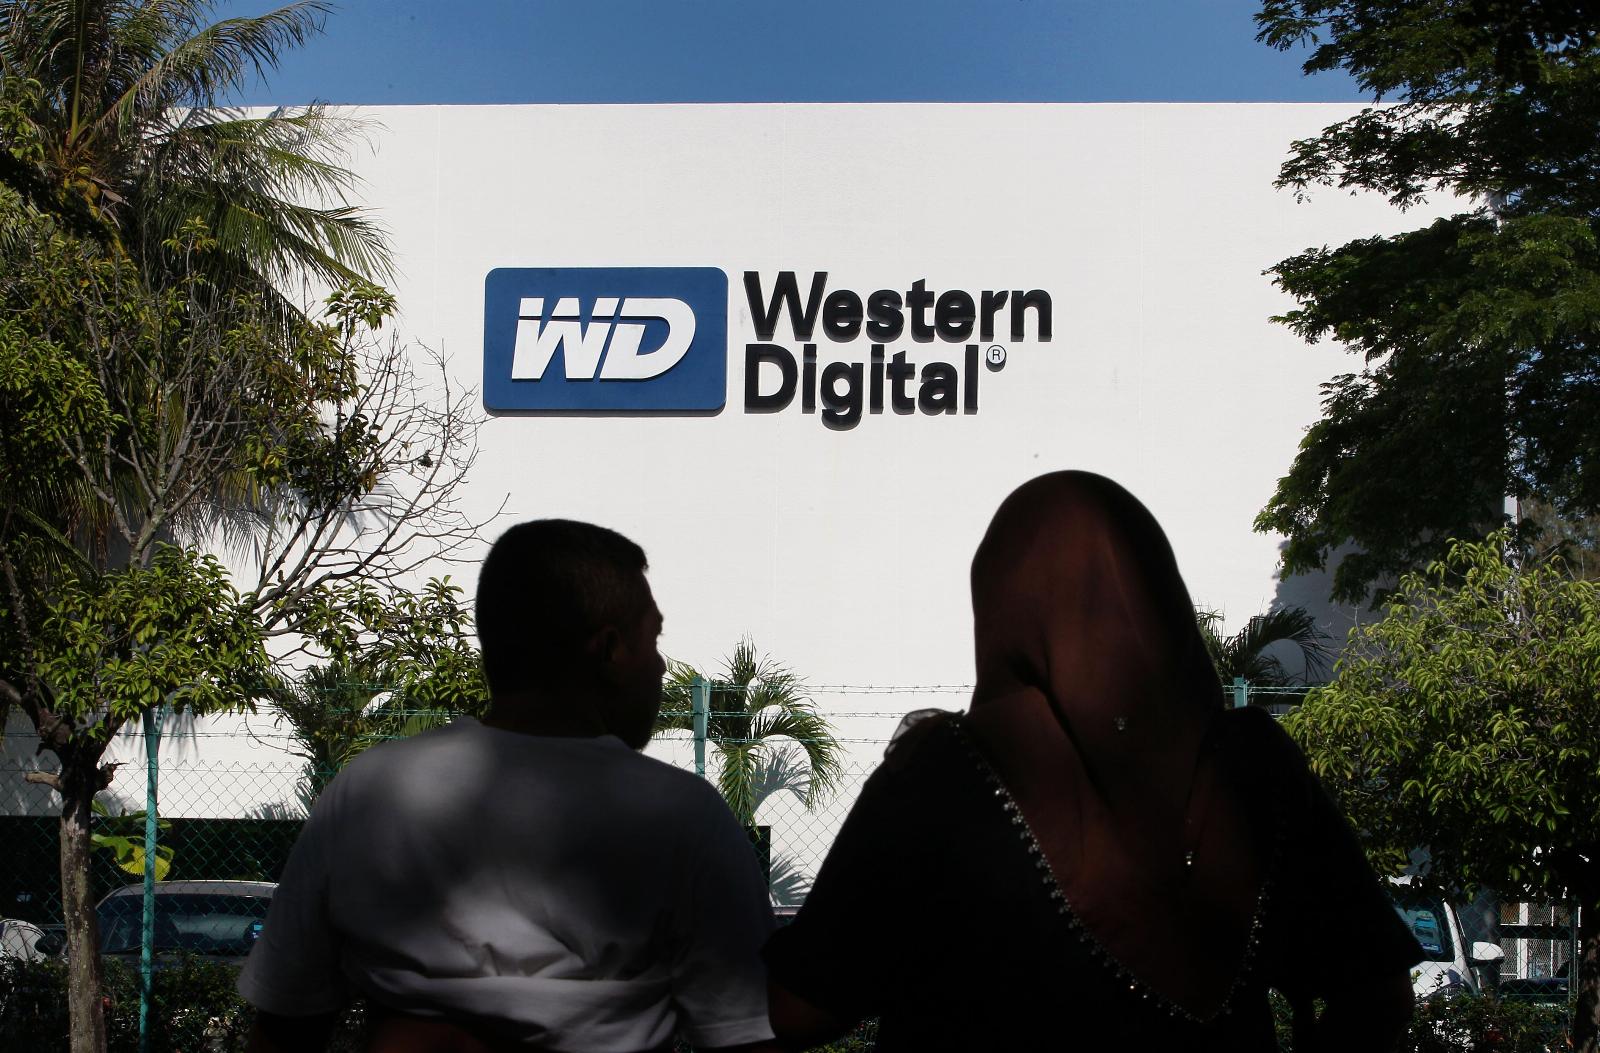 Hackers claim vast access to Western Digital systems